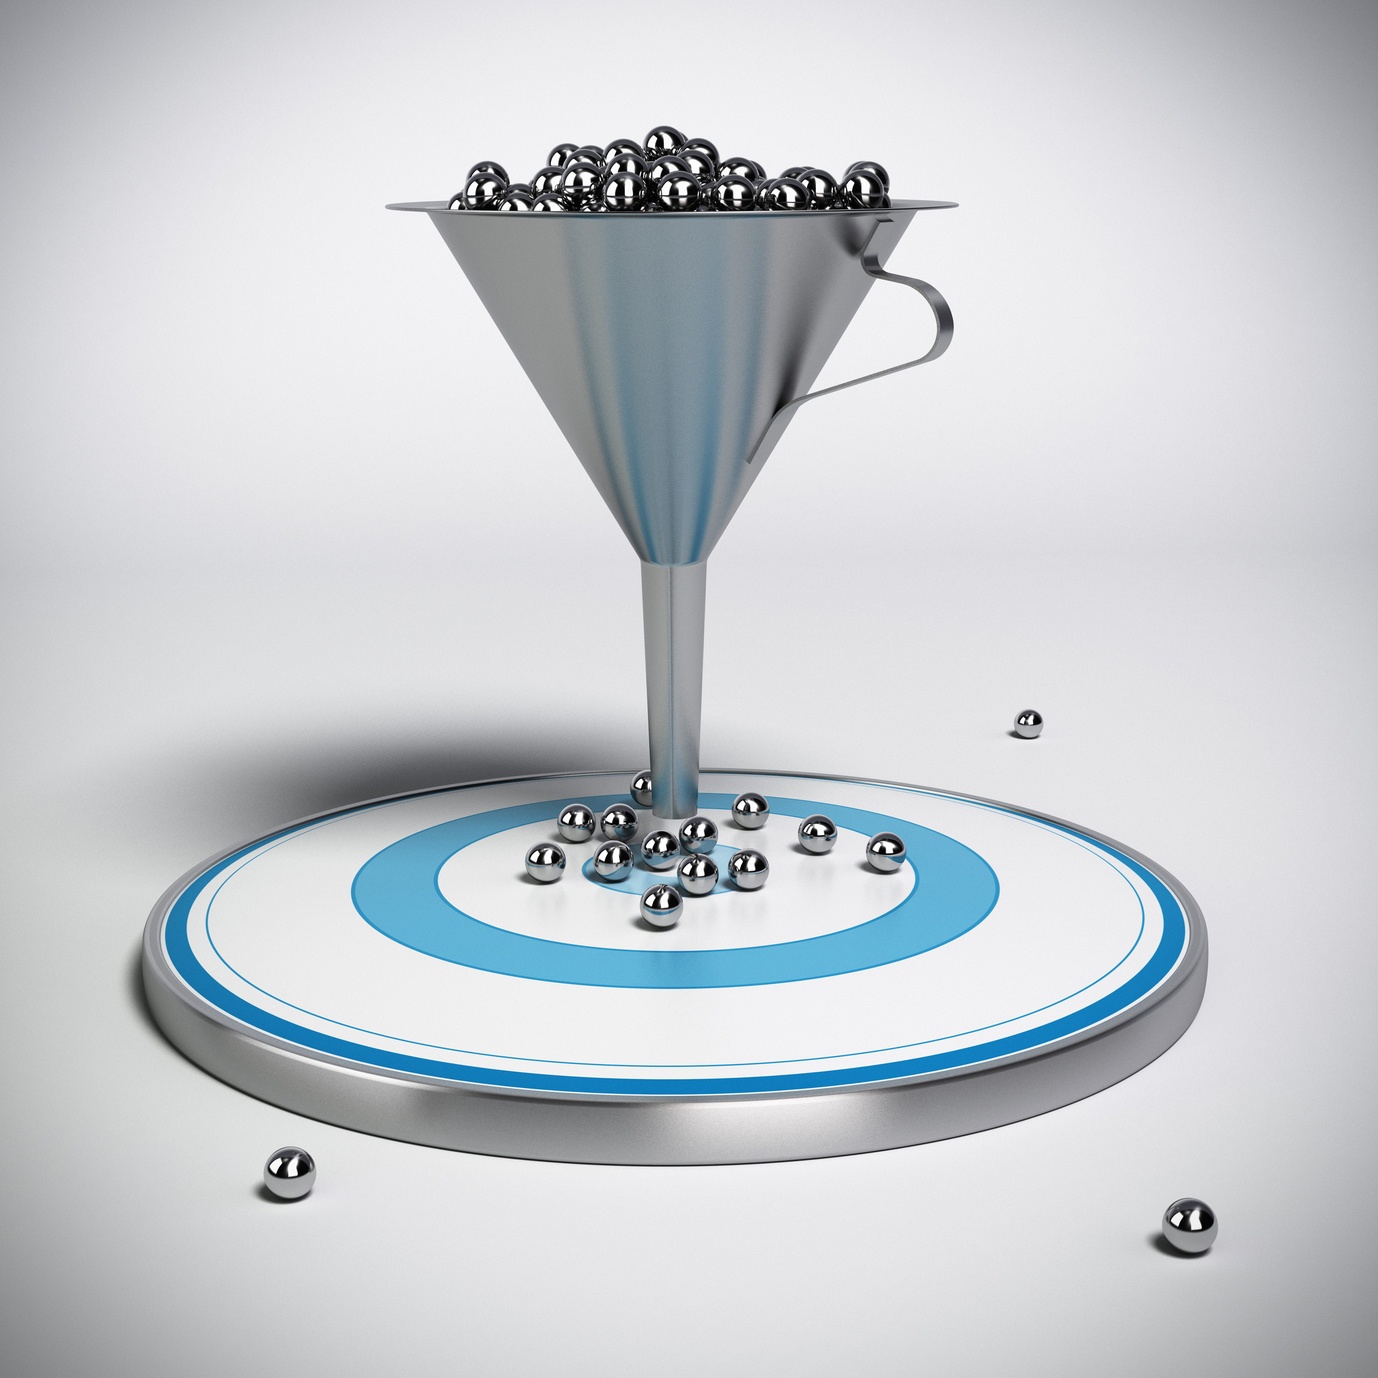 Plan Your Content Based on the Sales Funnel